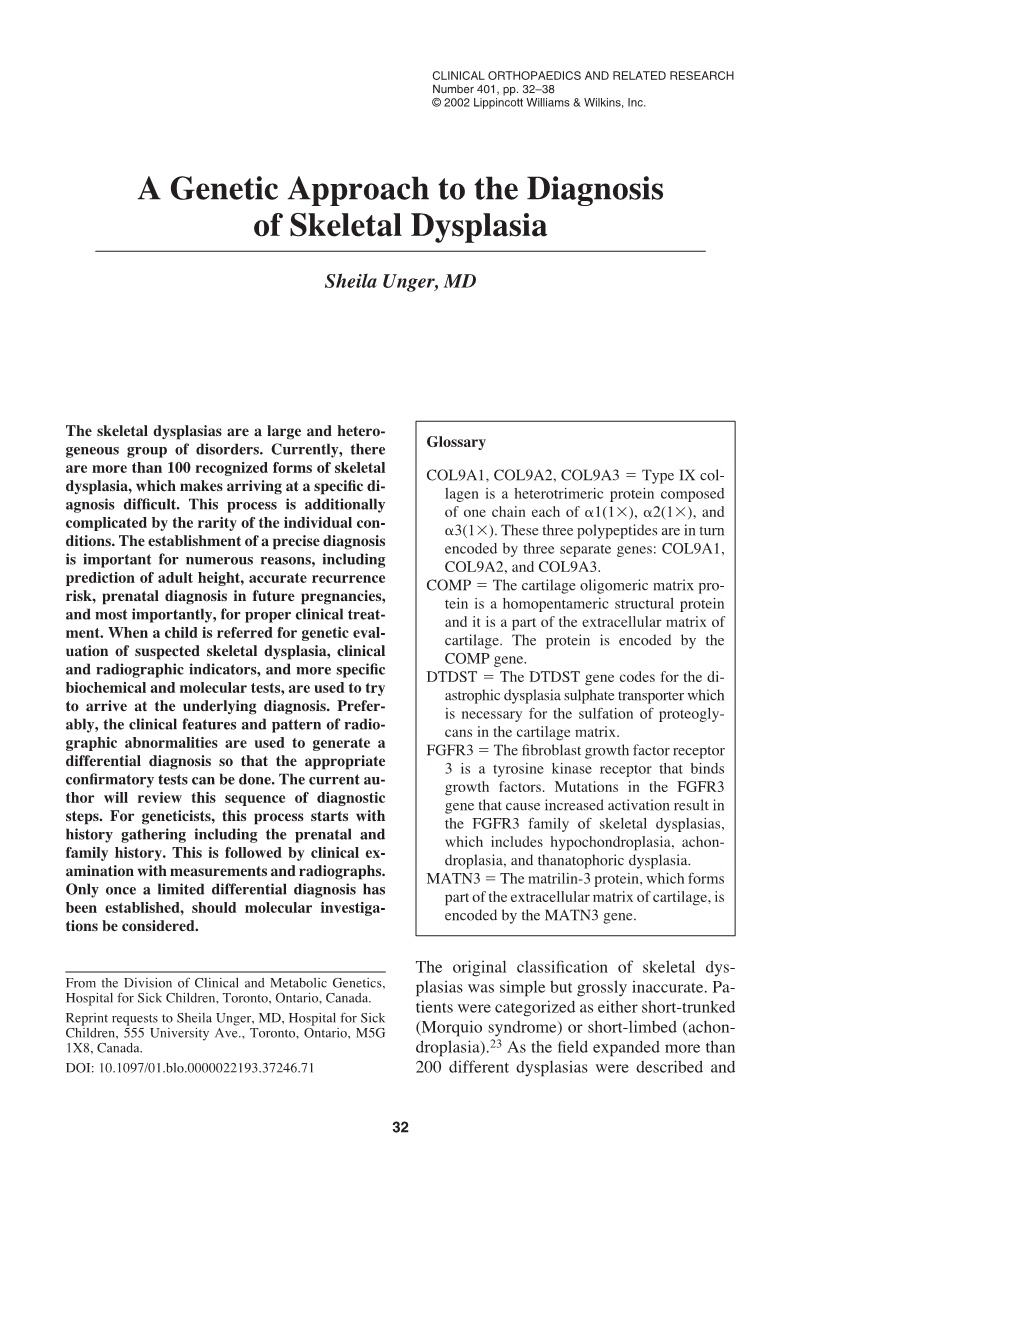 A Genetic Approach to the Diagnosis of Skeletal Dysplasia